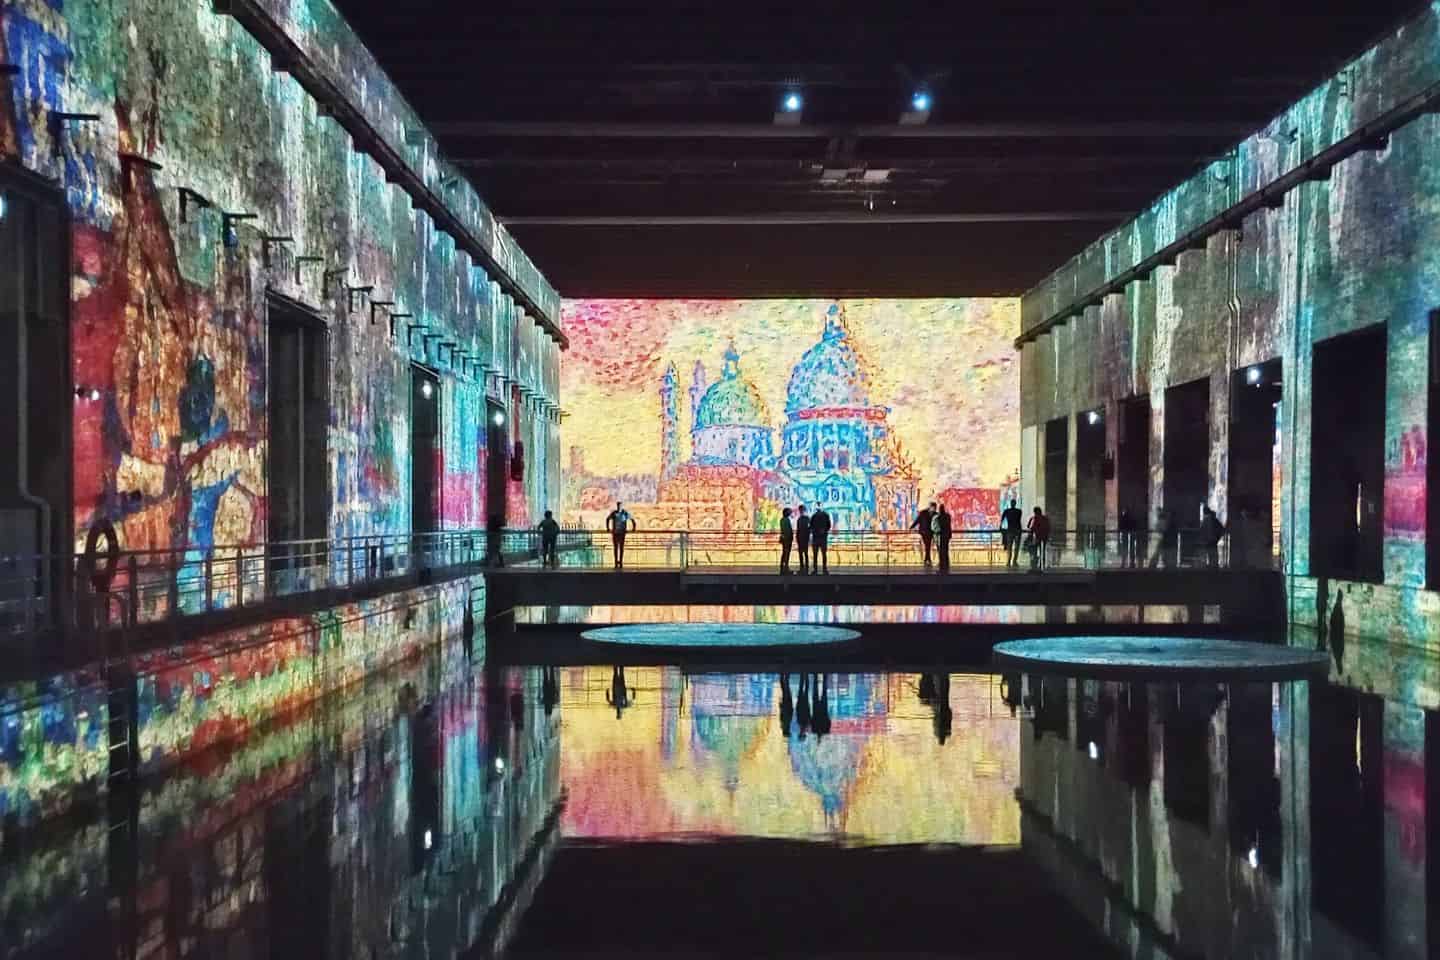 Colorful artwork reflecting on water in a dark venue